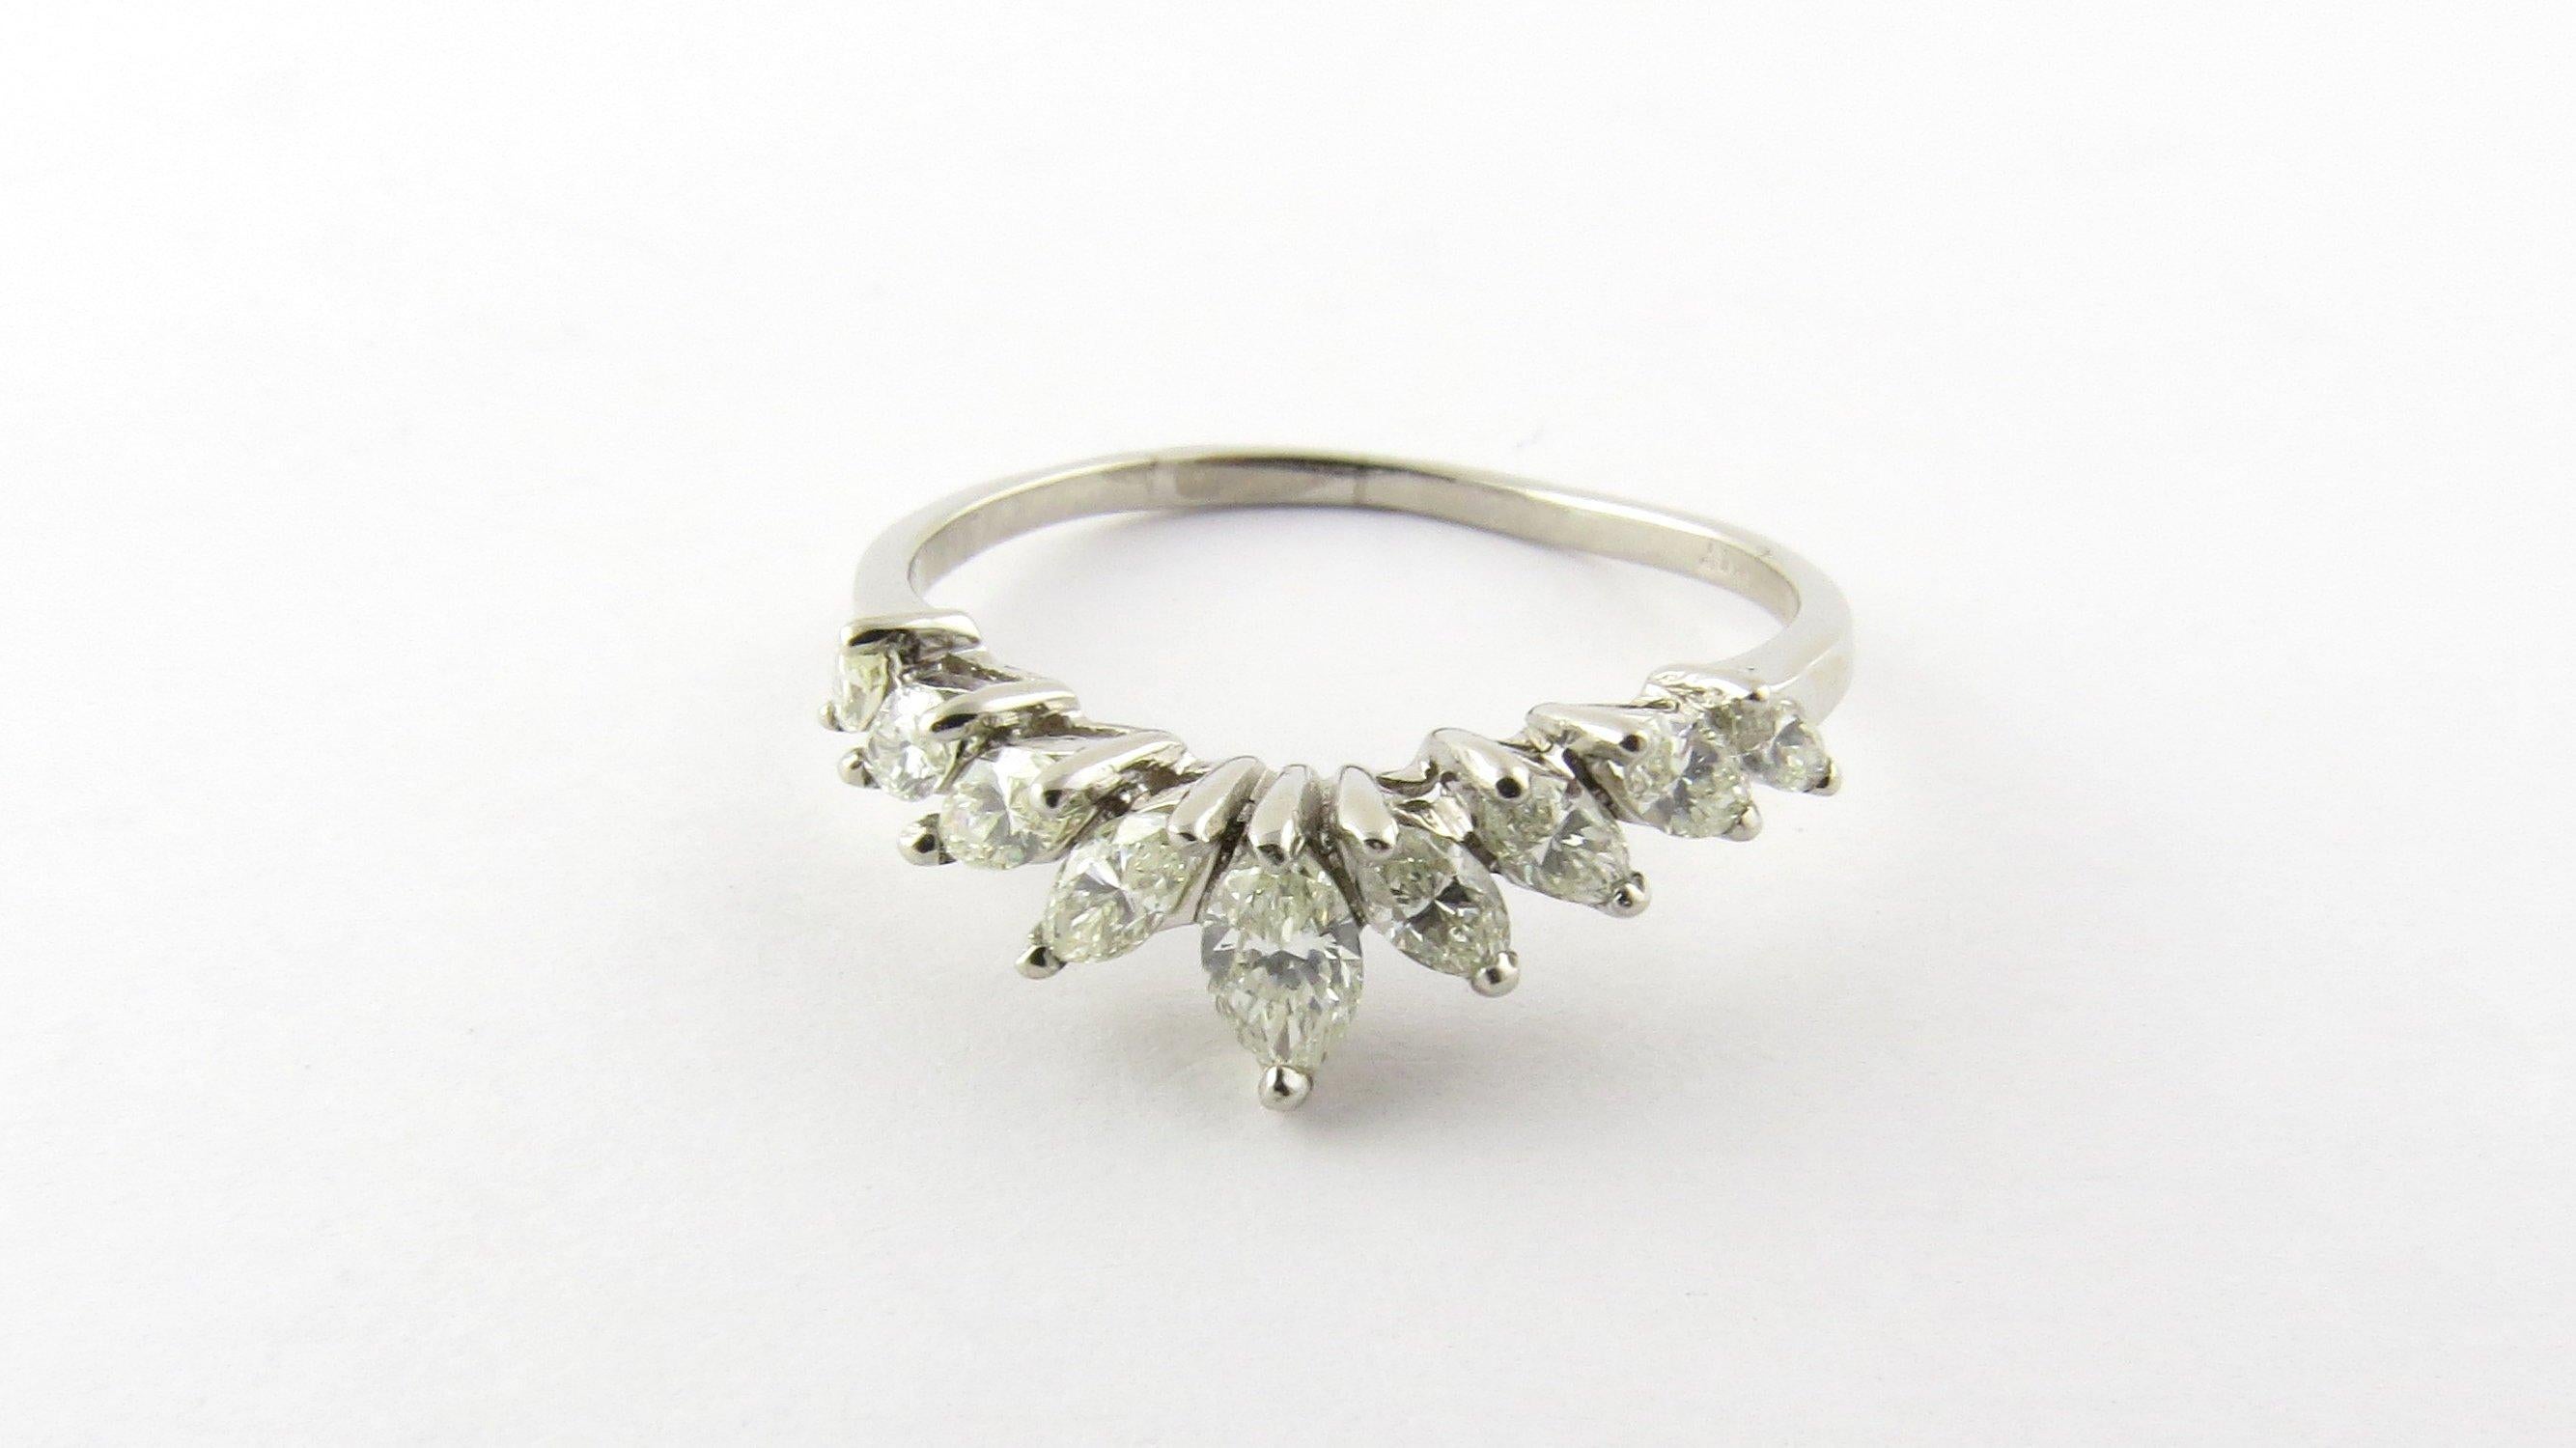 Vintage Platinum Marquis Diamond Ring Size 8.75 
This elegant ring features nine graduated marquis diamonds set in classic platinum. Shank measures 1 mm. 
Approximate total diamond weight: .40 ct. 
Diamond color: K-L 
Diamond clarity: SI1 
Ring